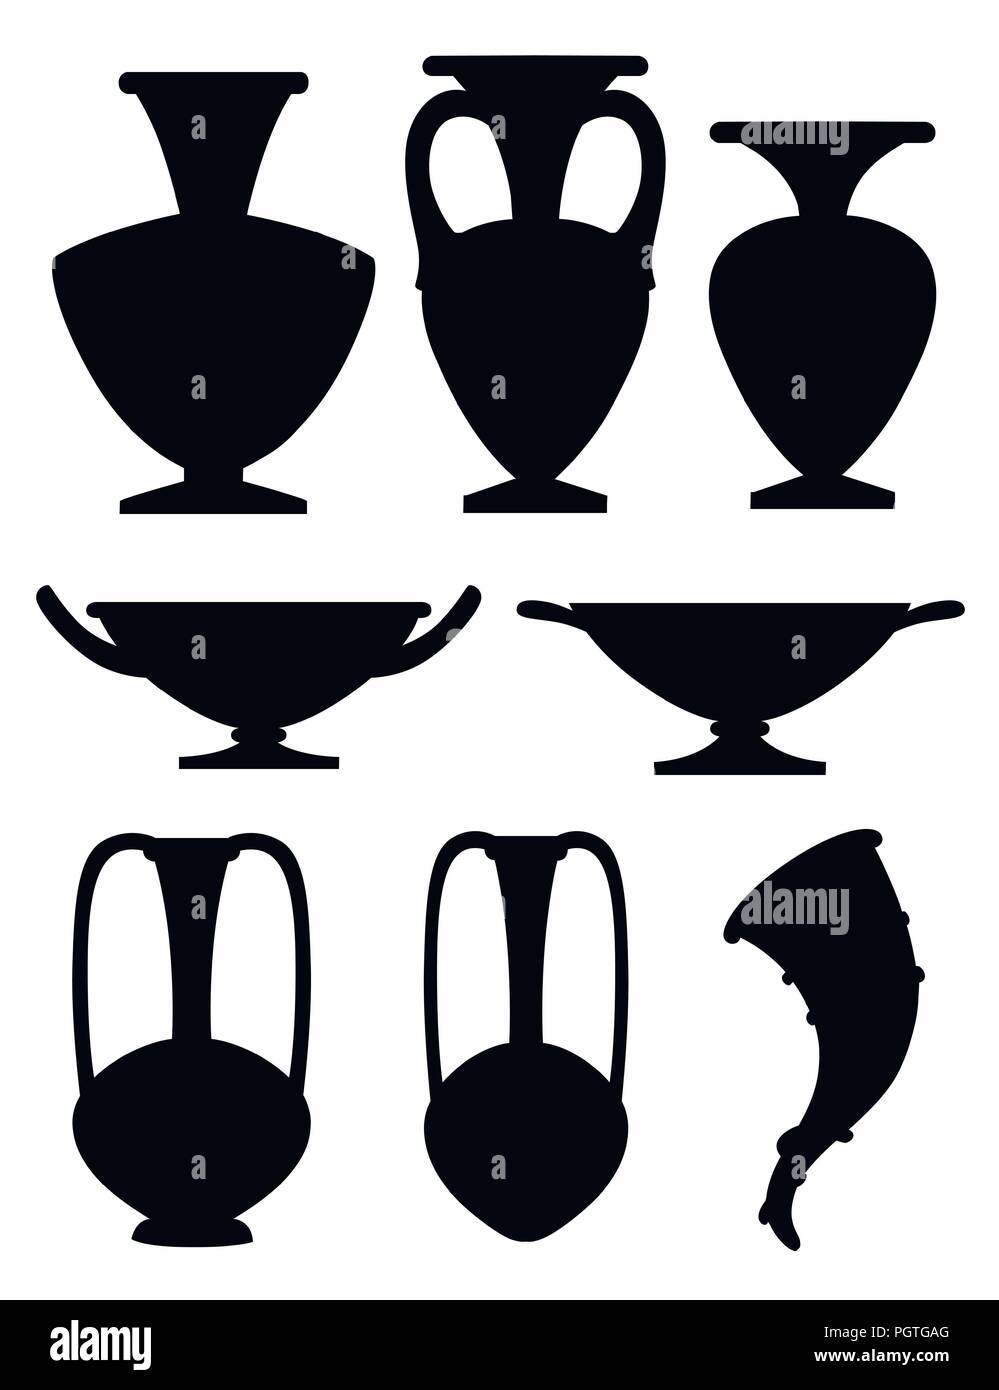 Black silhouette. Greek pottery icon collection. Amphora, rhyton, kylix. Greek or roman culture. Flat vector illustration isolated on white background Stock Vector